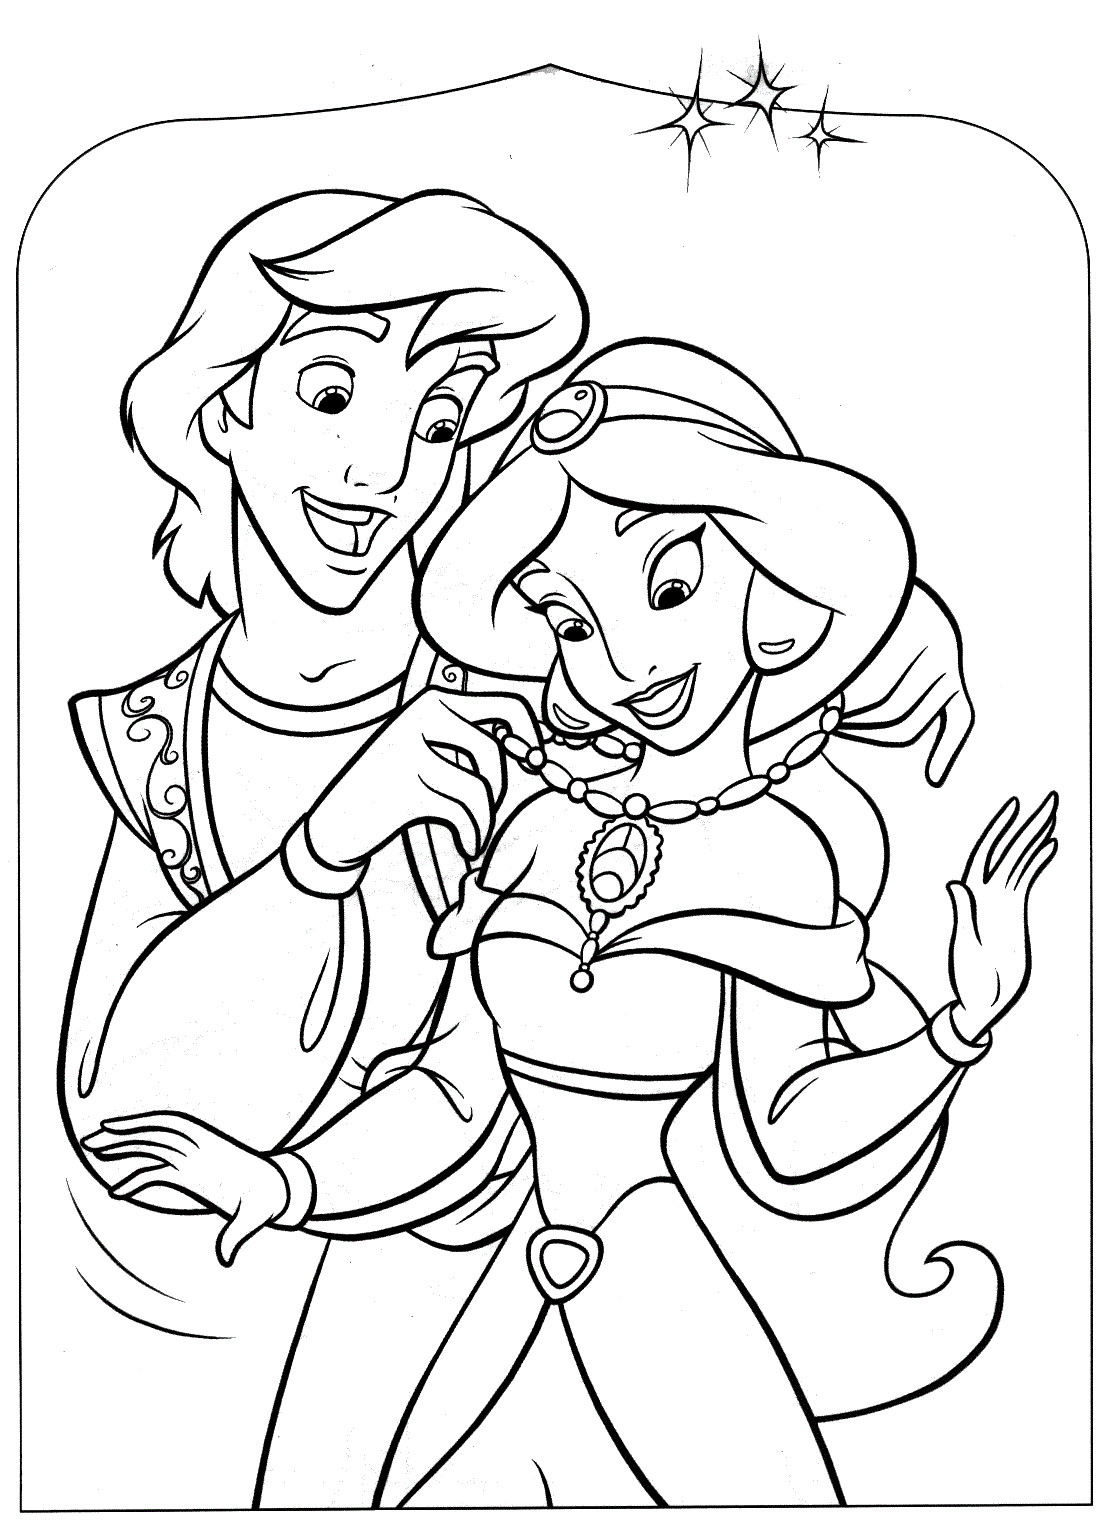 Coloring Pages For Toddlers To Print
 Free Printable Aladdin Coloring Pages For Kids